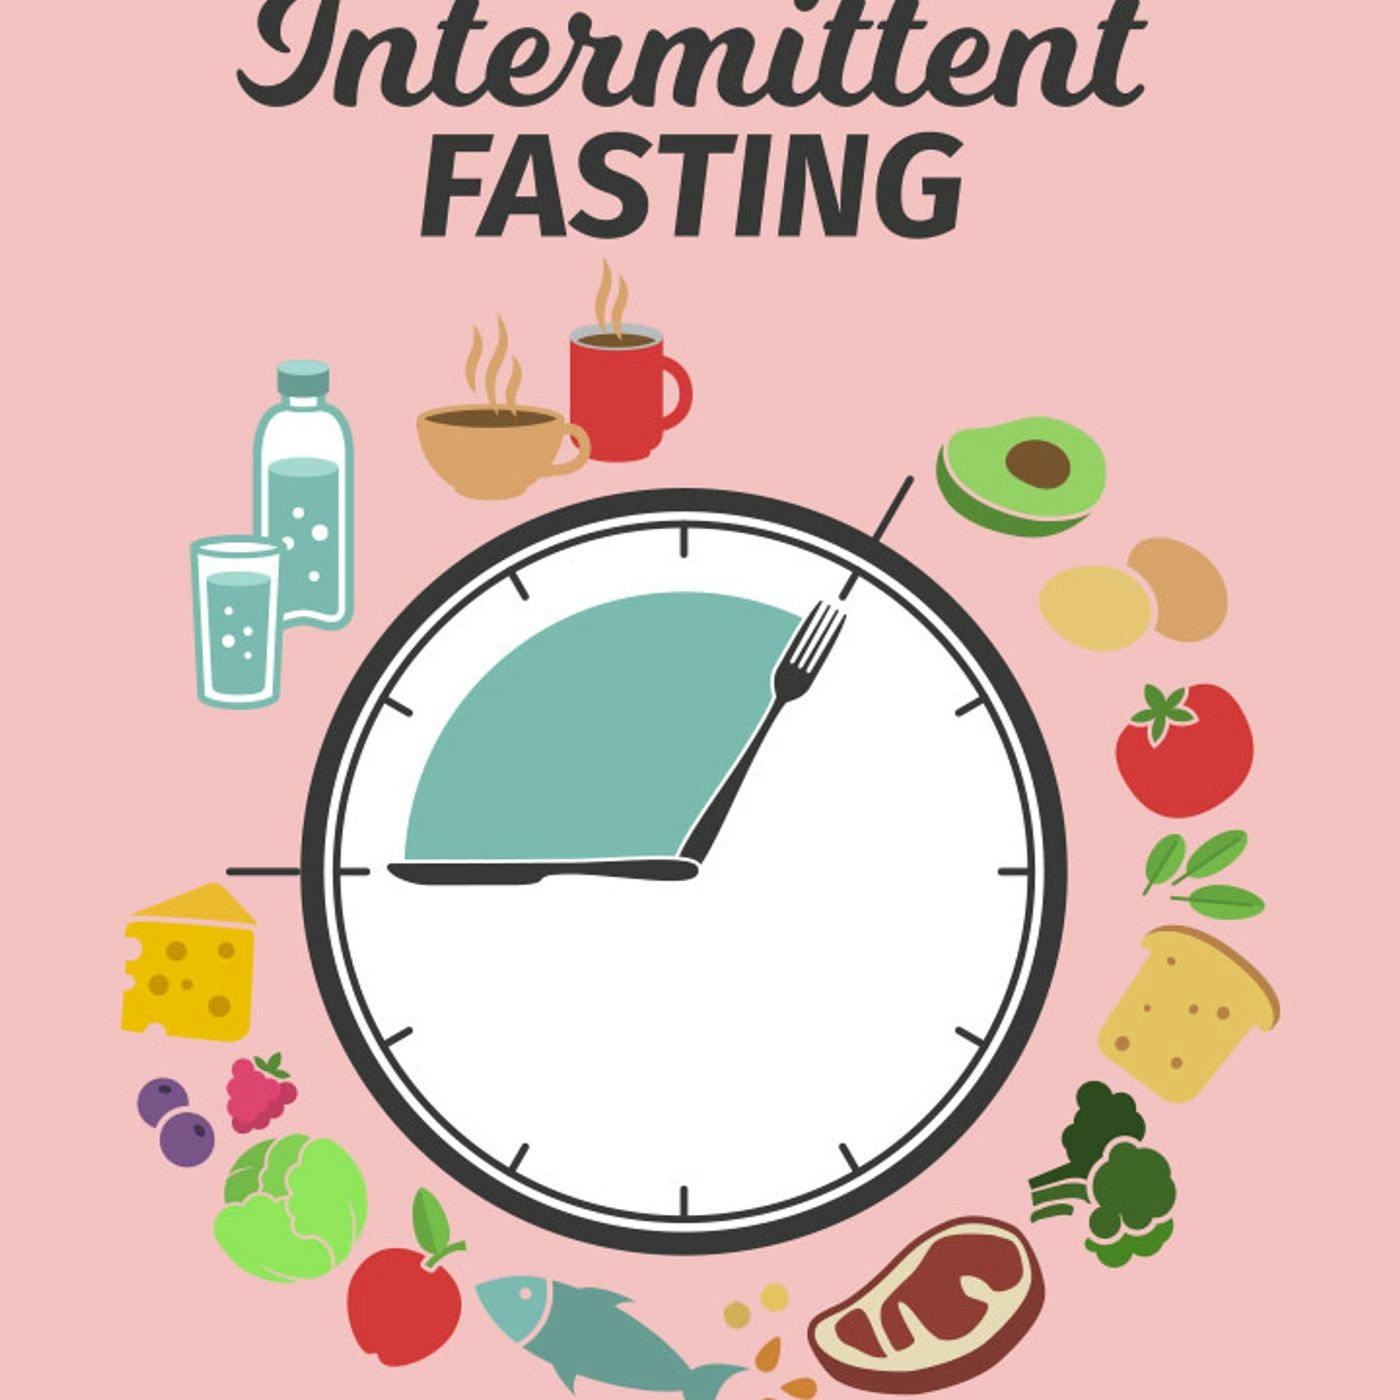 Types of Intermittent Fasting and Who Should be doing it, by Karen Malkin